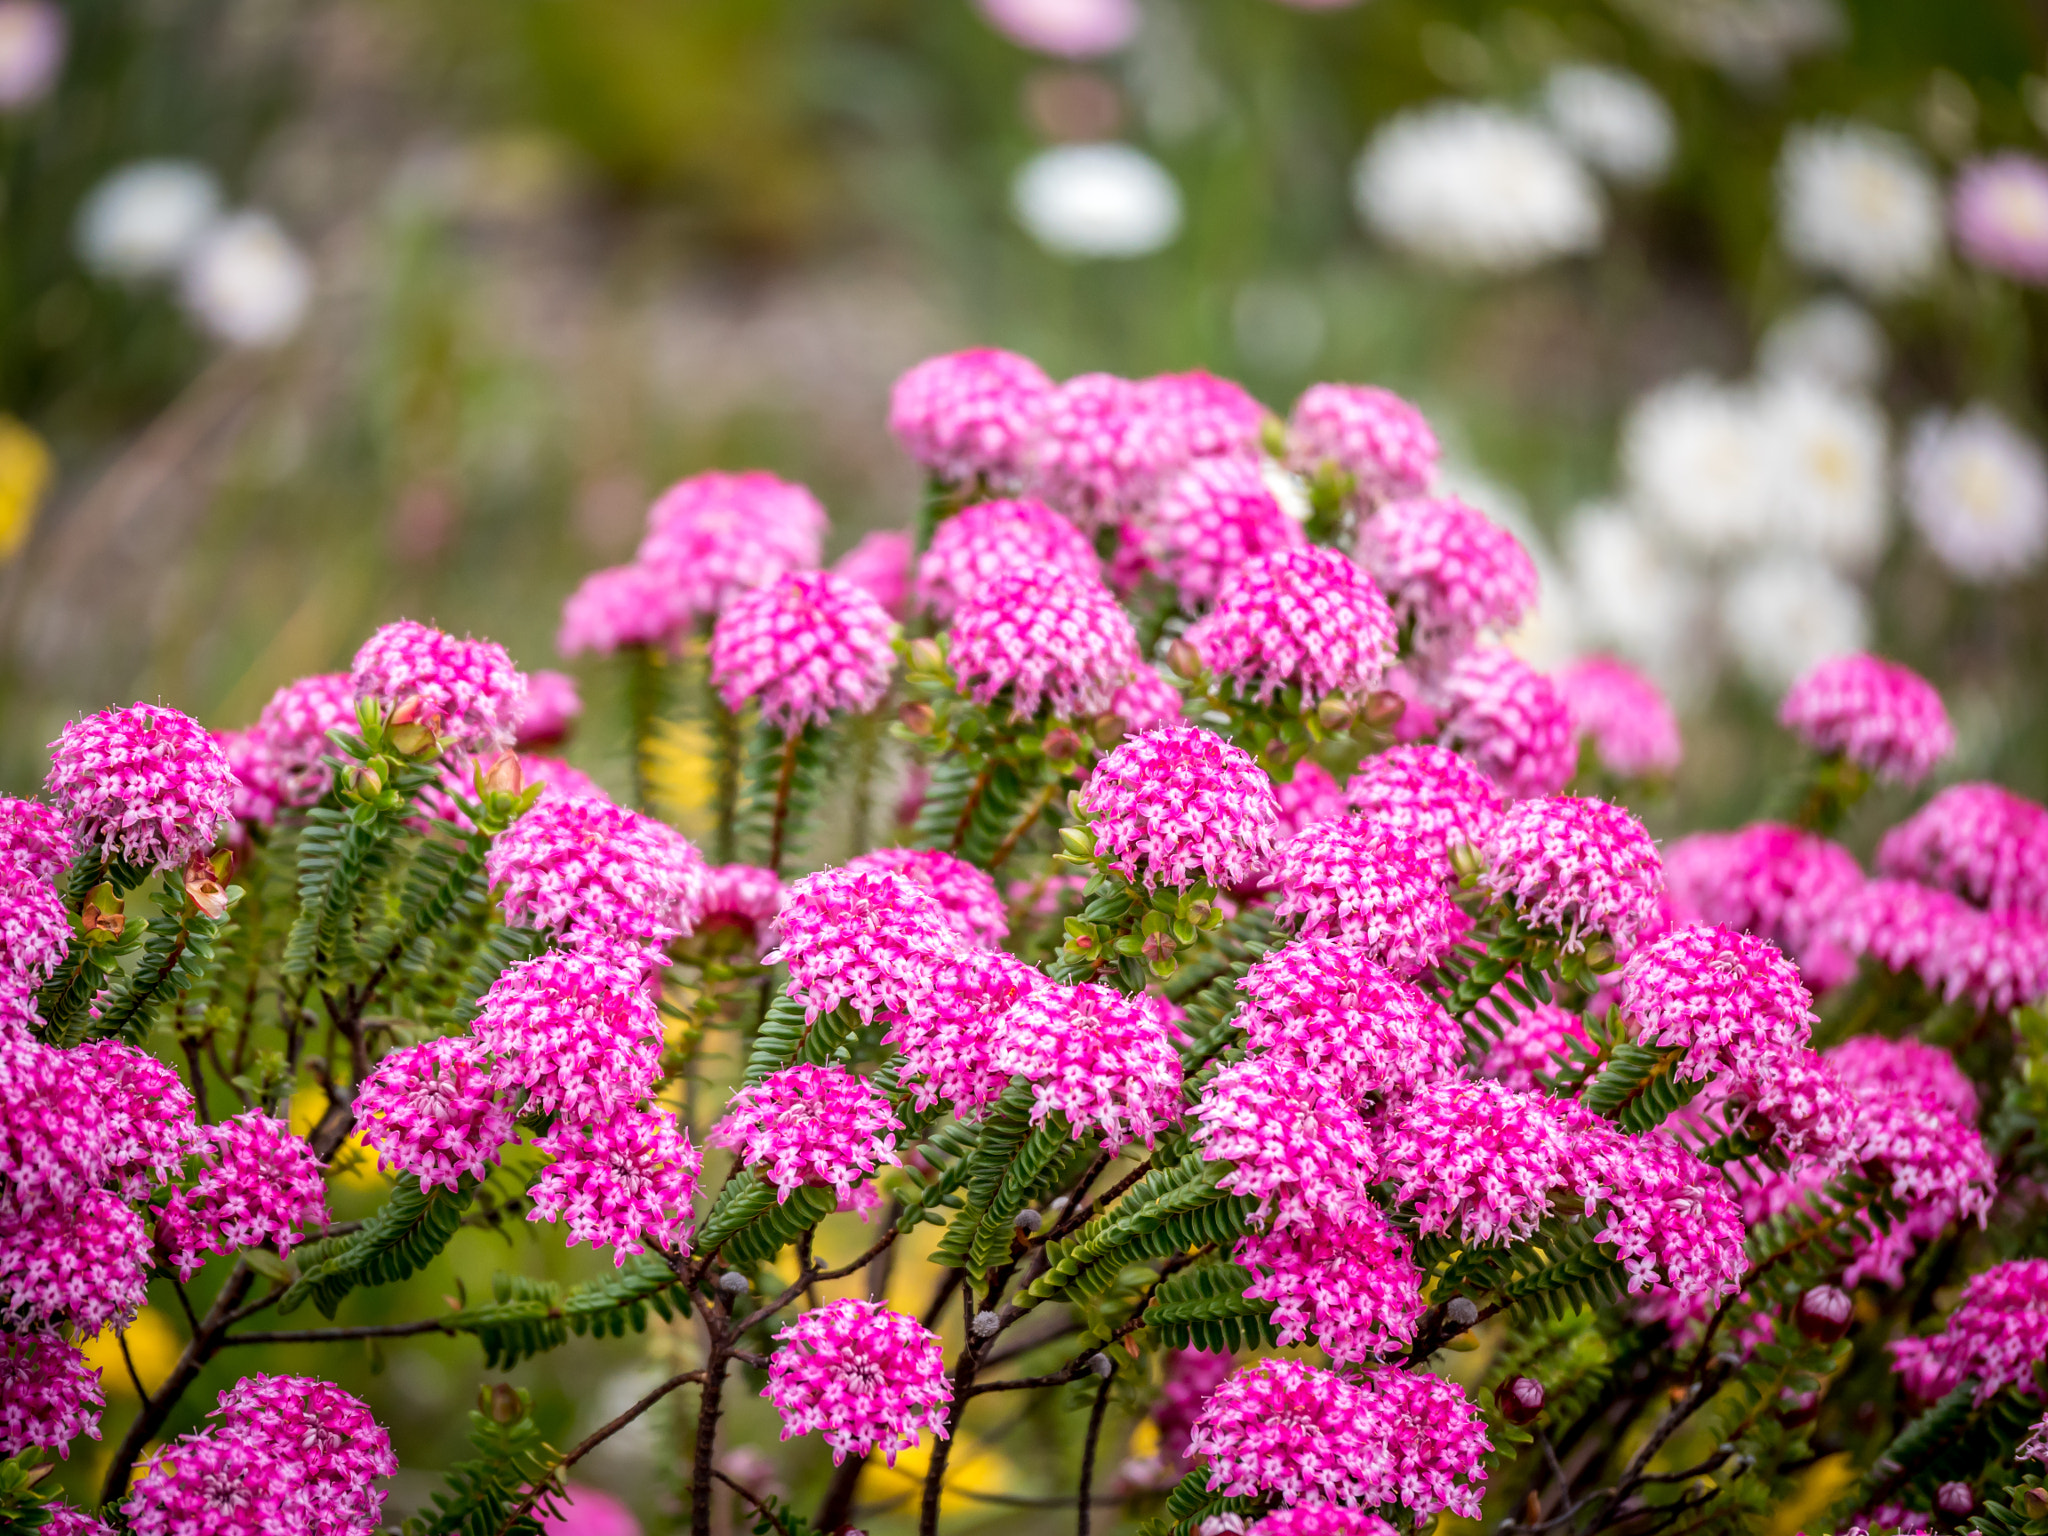 Panasonic Lumix DMC-GH4 sample photo. Pink colour flowers in kings park, perth photography